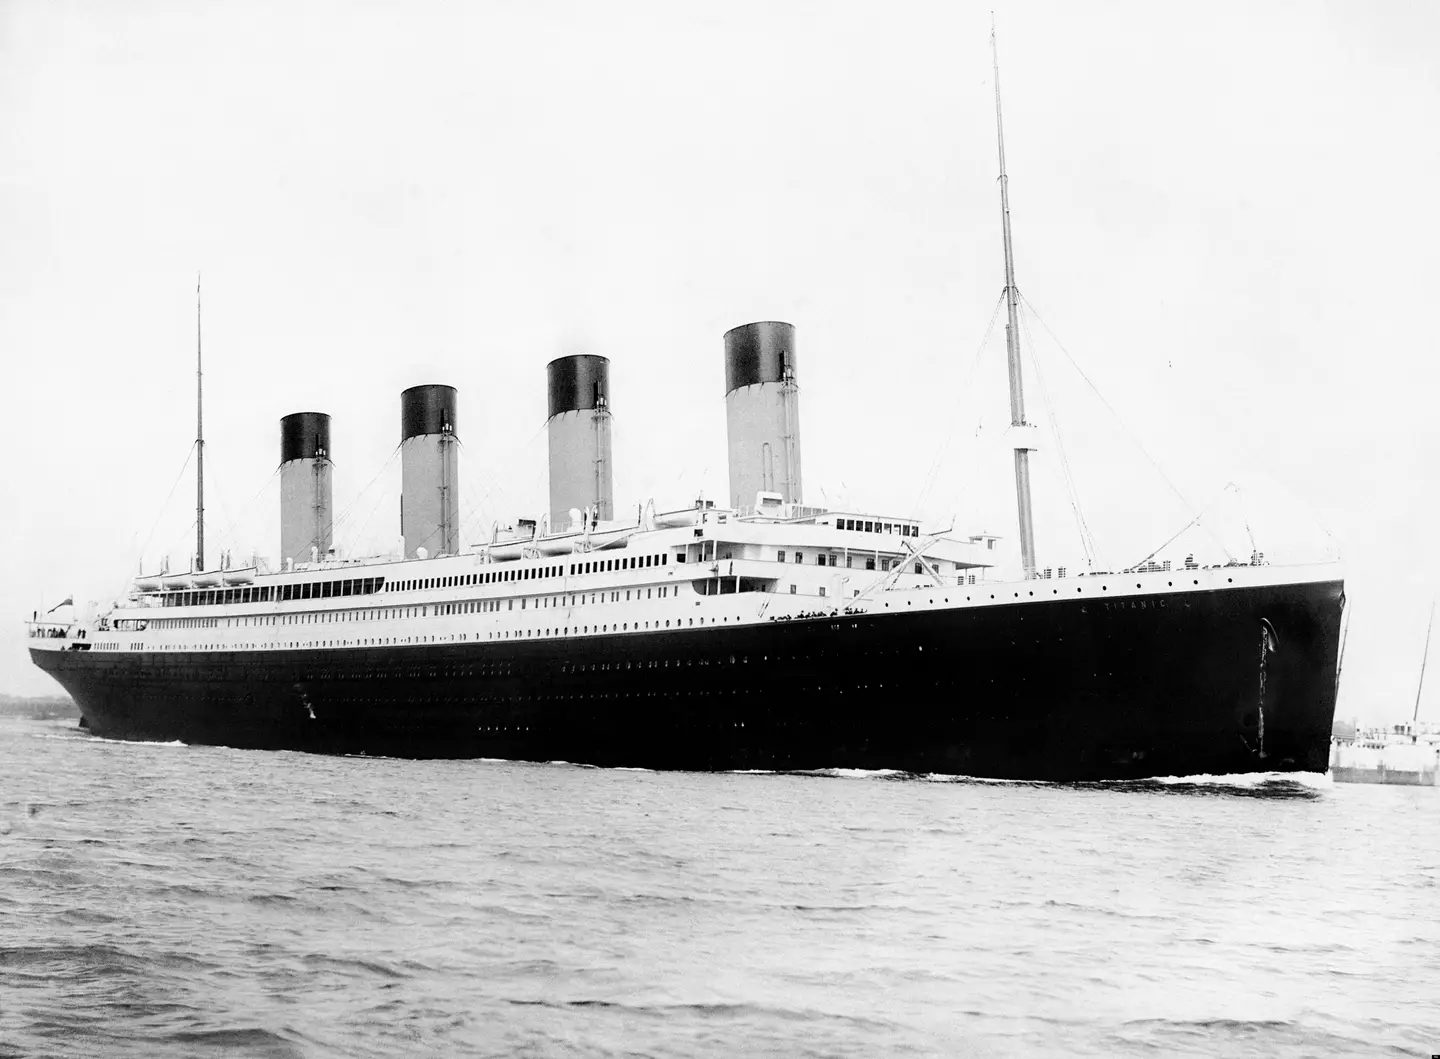 The Titanic set sail from England on 10 April, 1912.